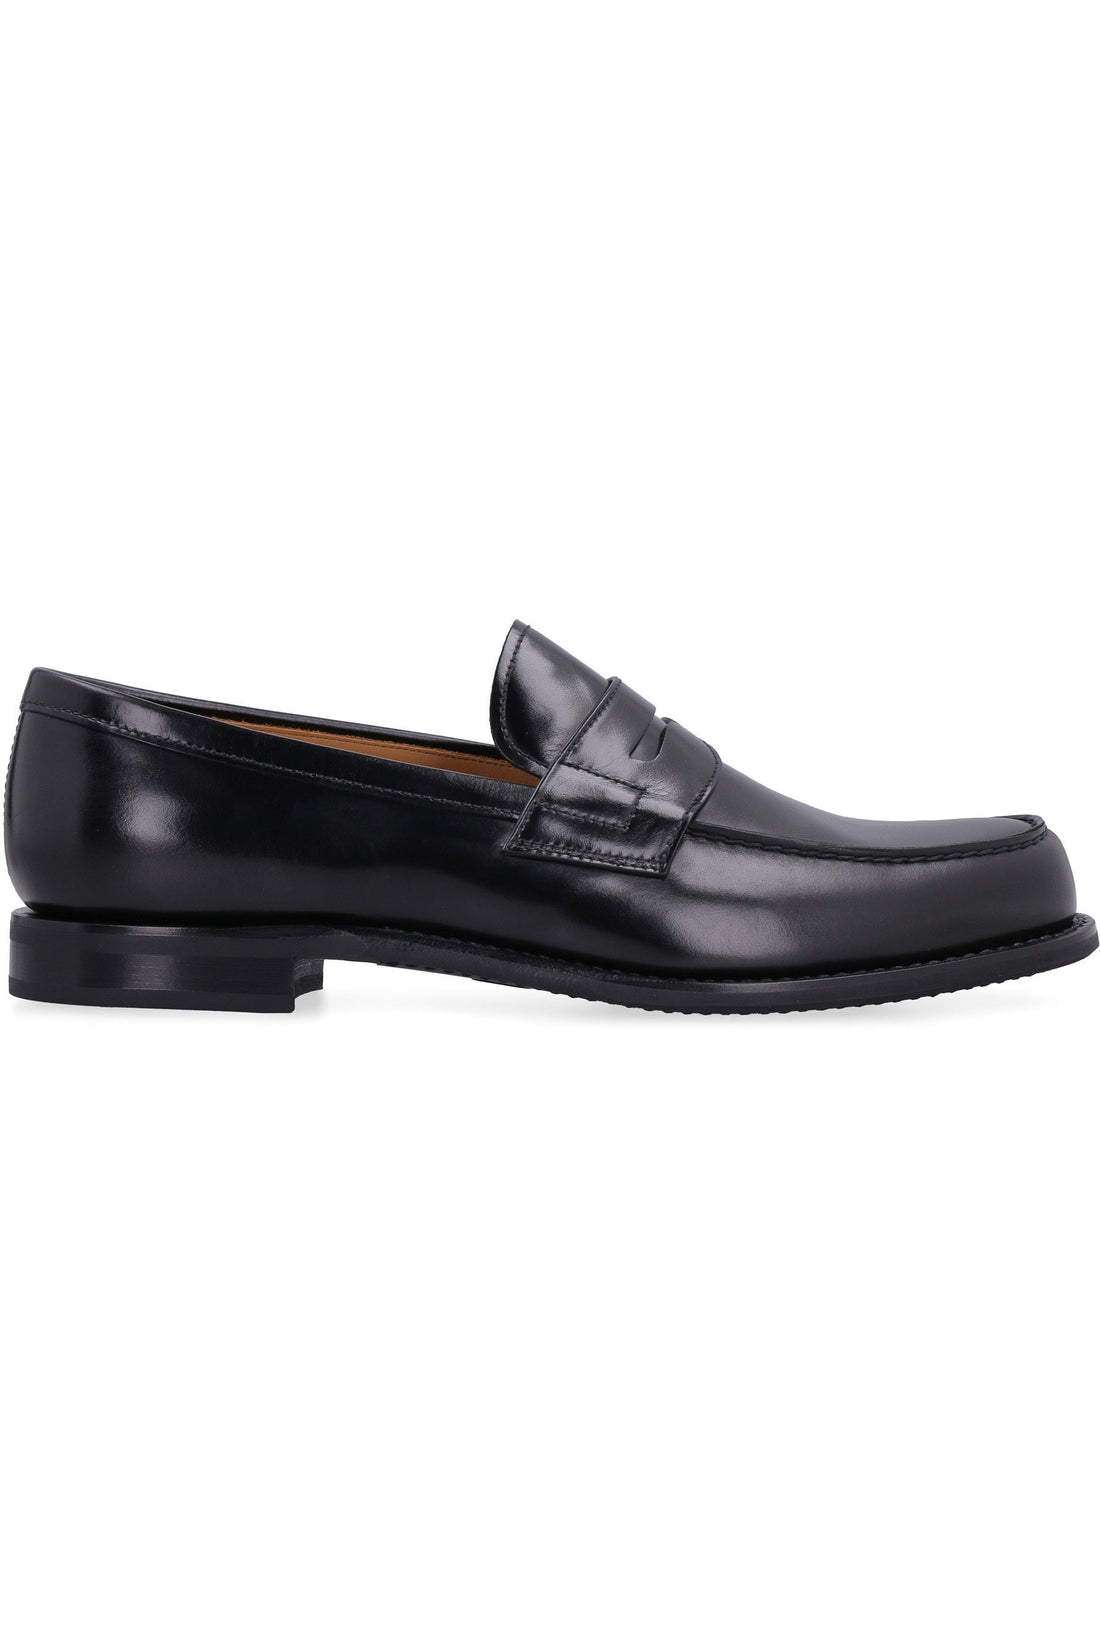 Church's-OUTLET-SALE-Gateshead leather loafers-ARCHIVIST